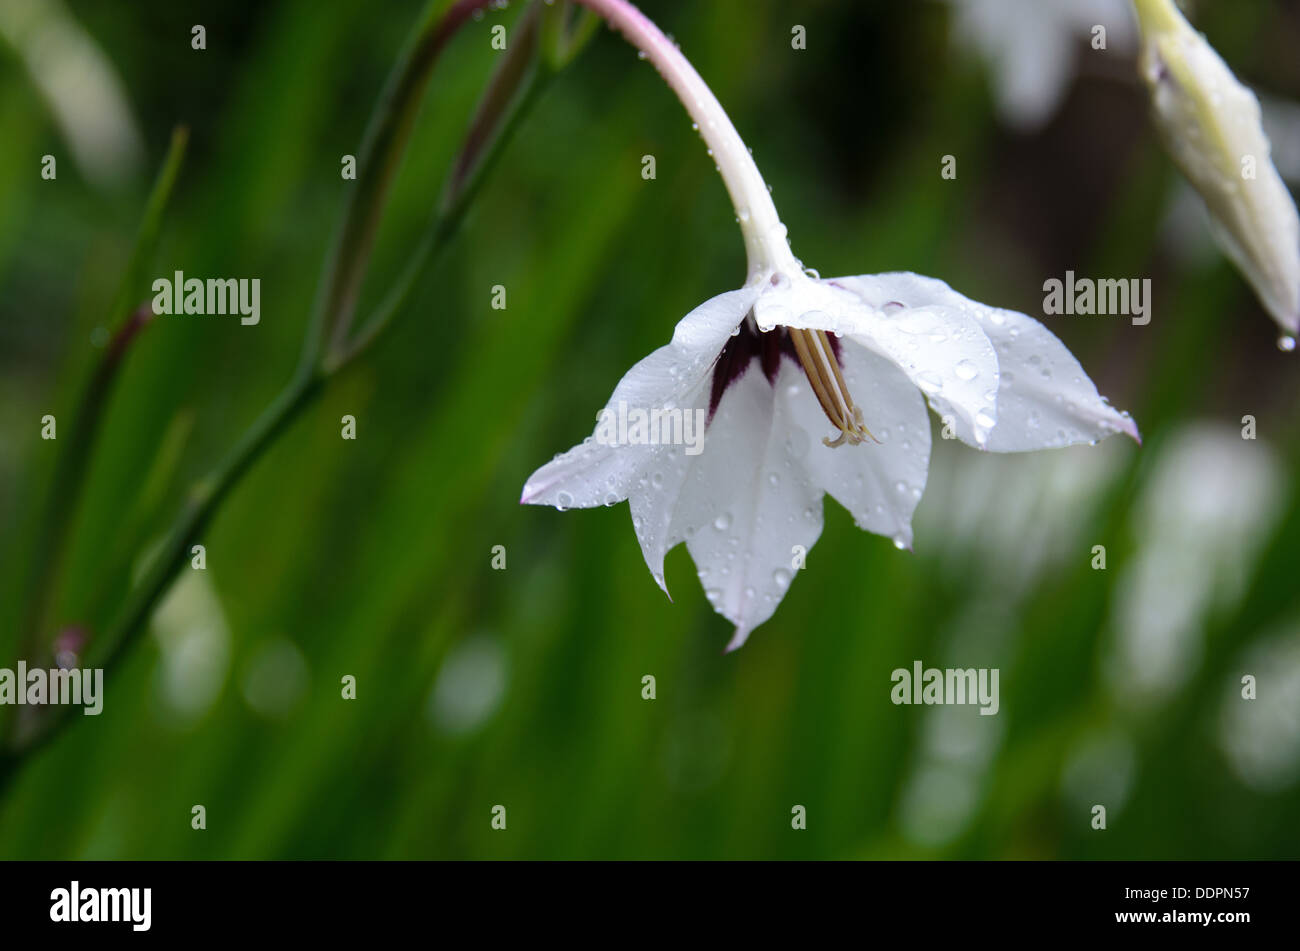 A Fragrant Gladiolus (Acidanthera) blossom swaying in a rain storm. Stock Photo